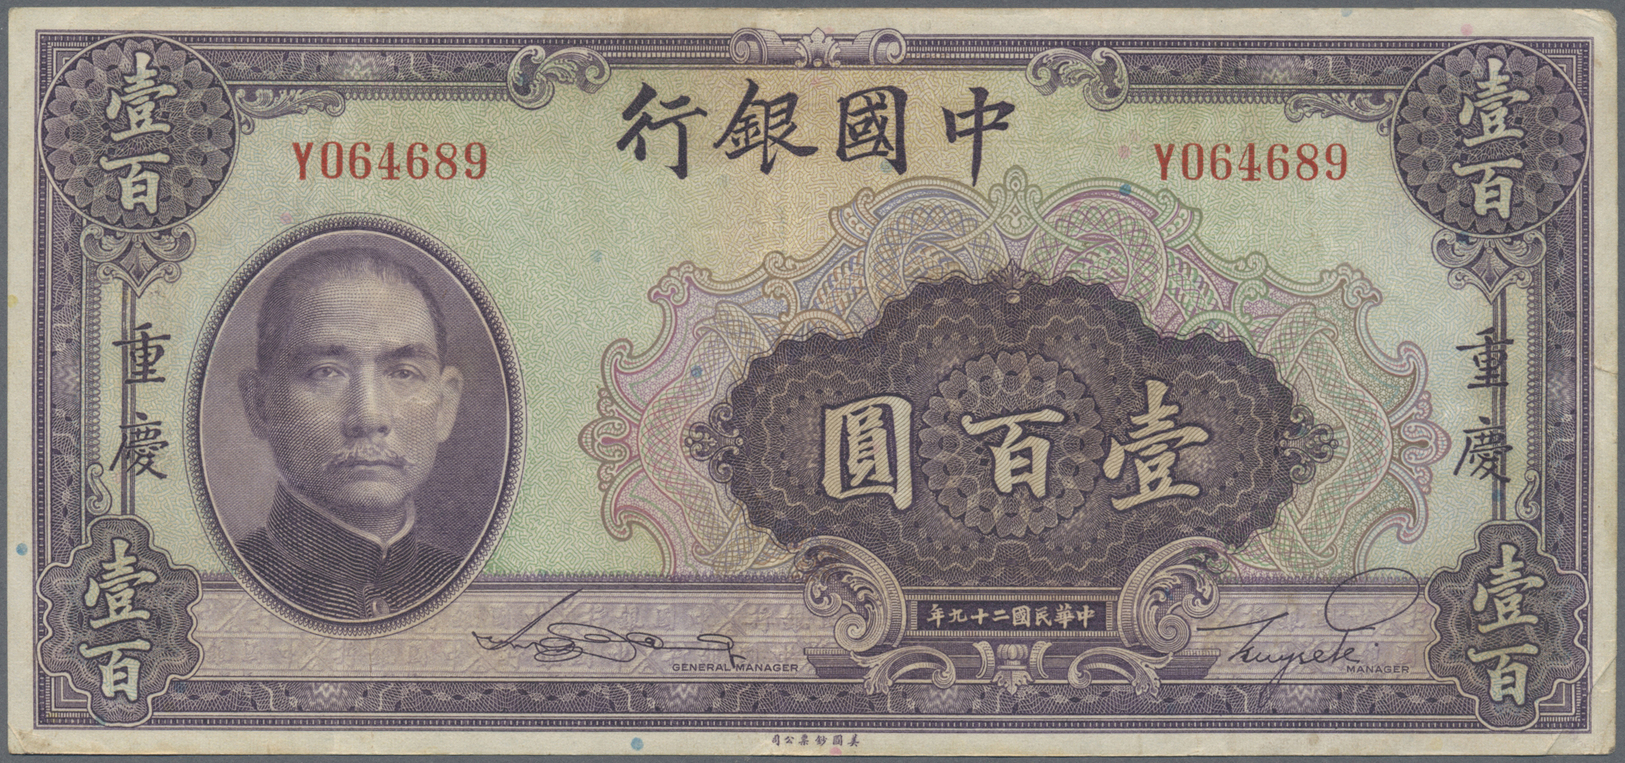 03542 China: 1935/40, four banknotes: Bank of Communications $5 1935, Bank of China $100 1940, Central Bank of China $5